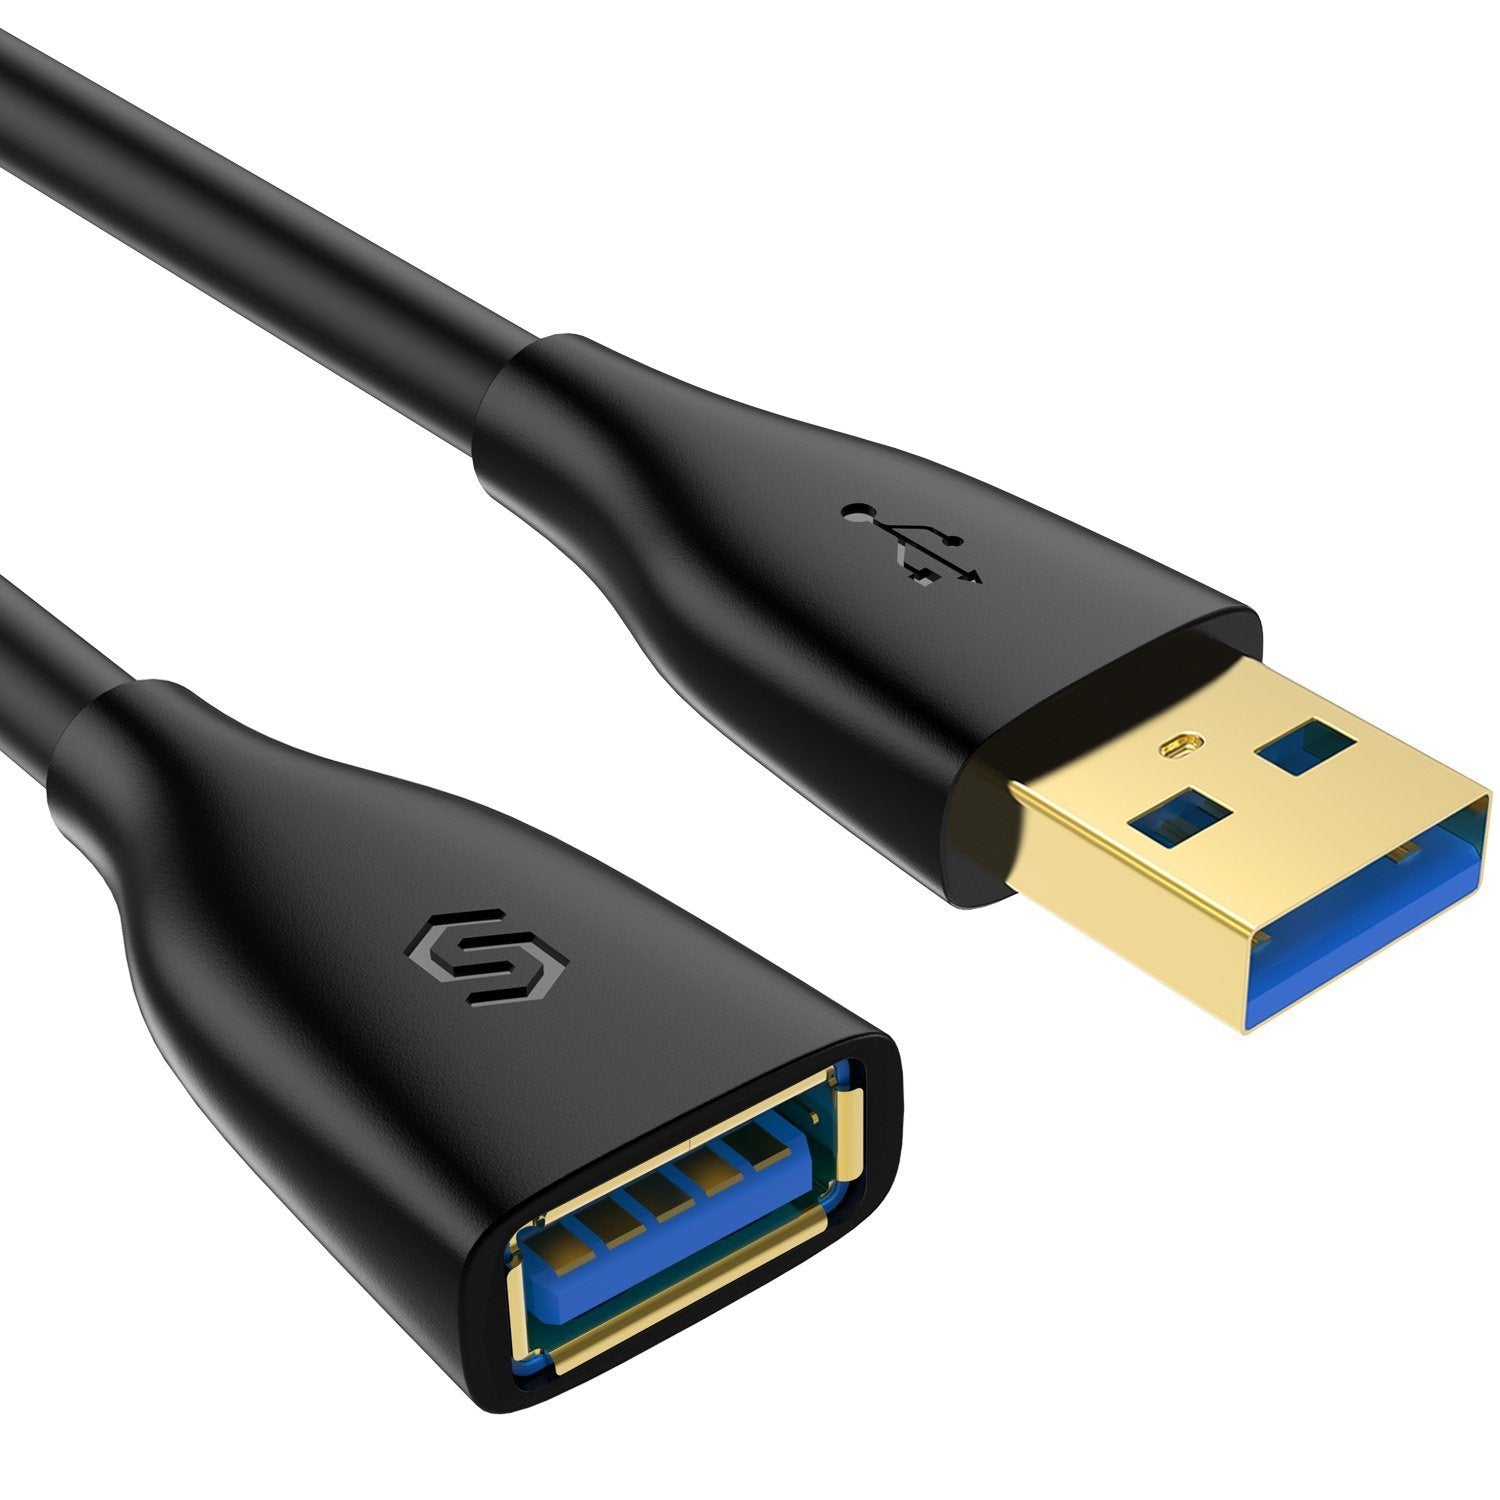 Syncwire USB 3.0 Extension Cable - 6.5 Feet - Store 974 | ستور ٩٧٤